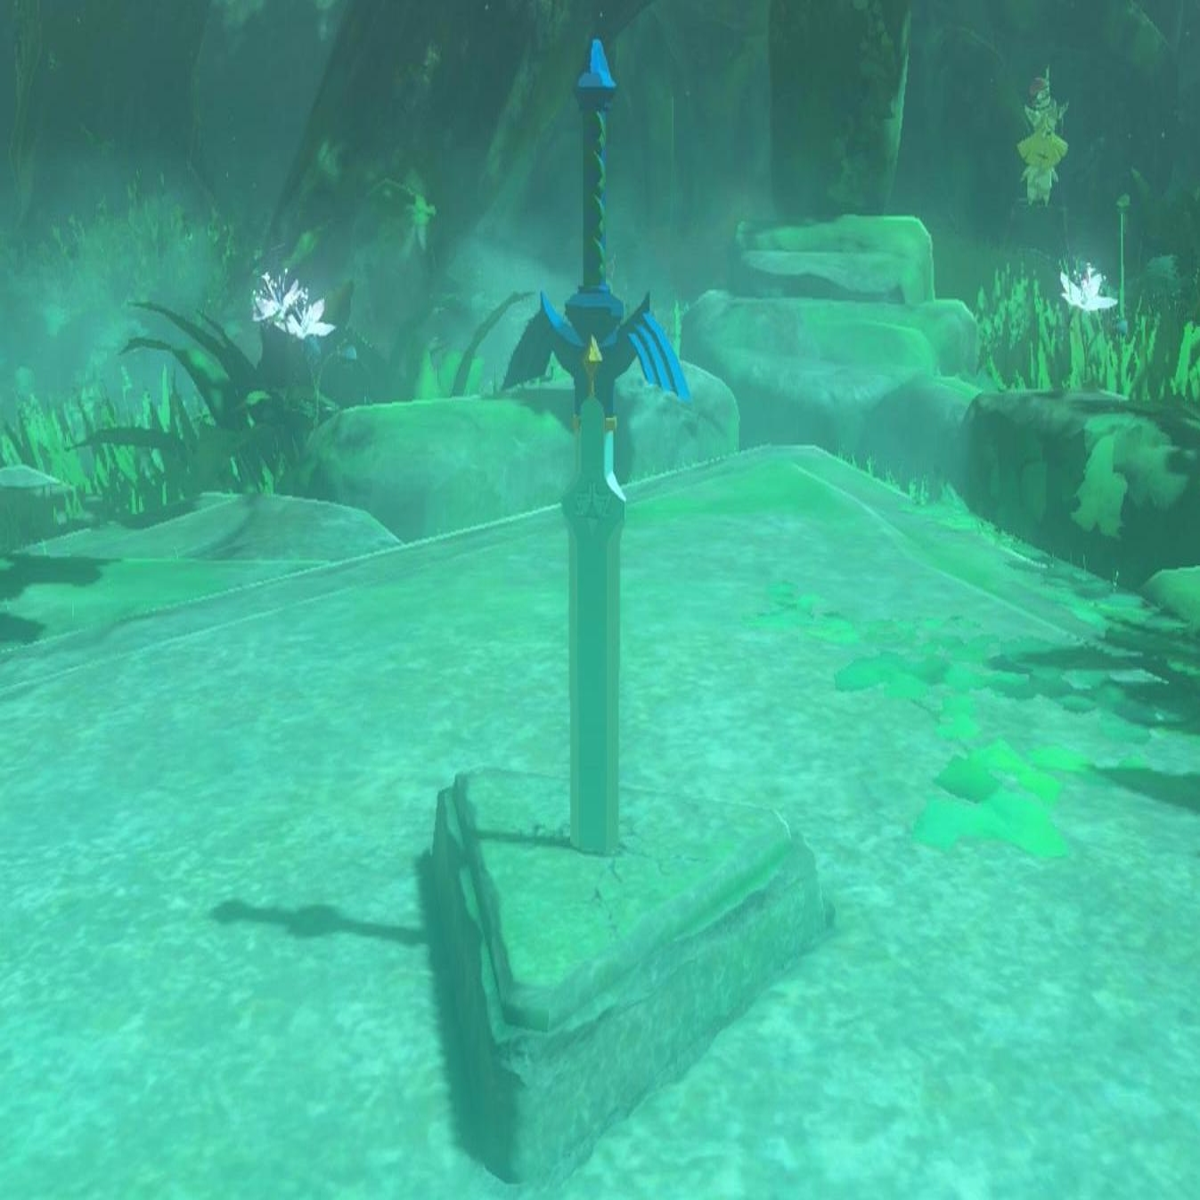 Zelda: Breath of the Wild Master Sword - location of the legendary weapon  and how to complete The Hero's Sword